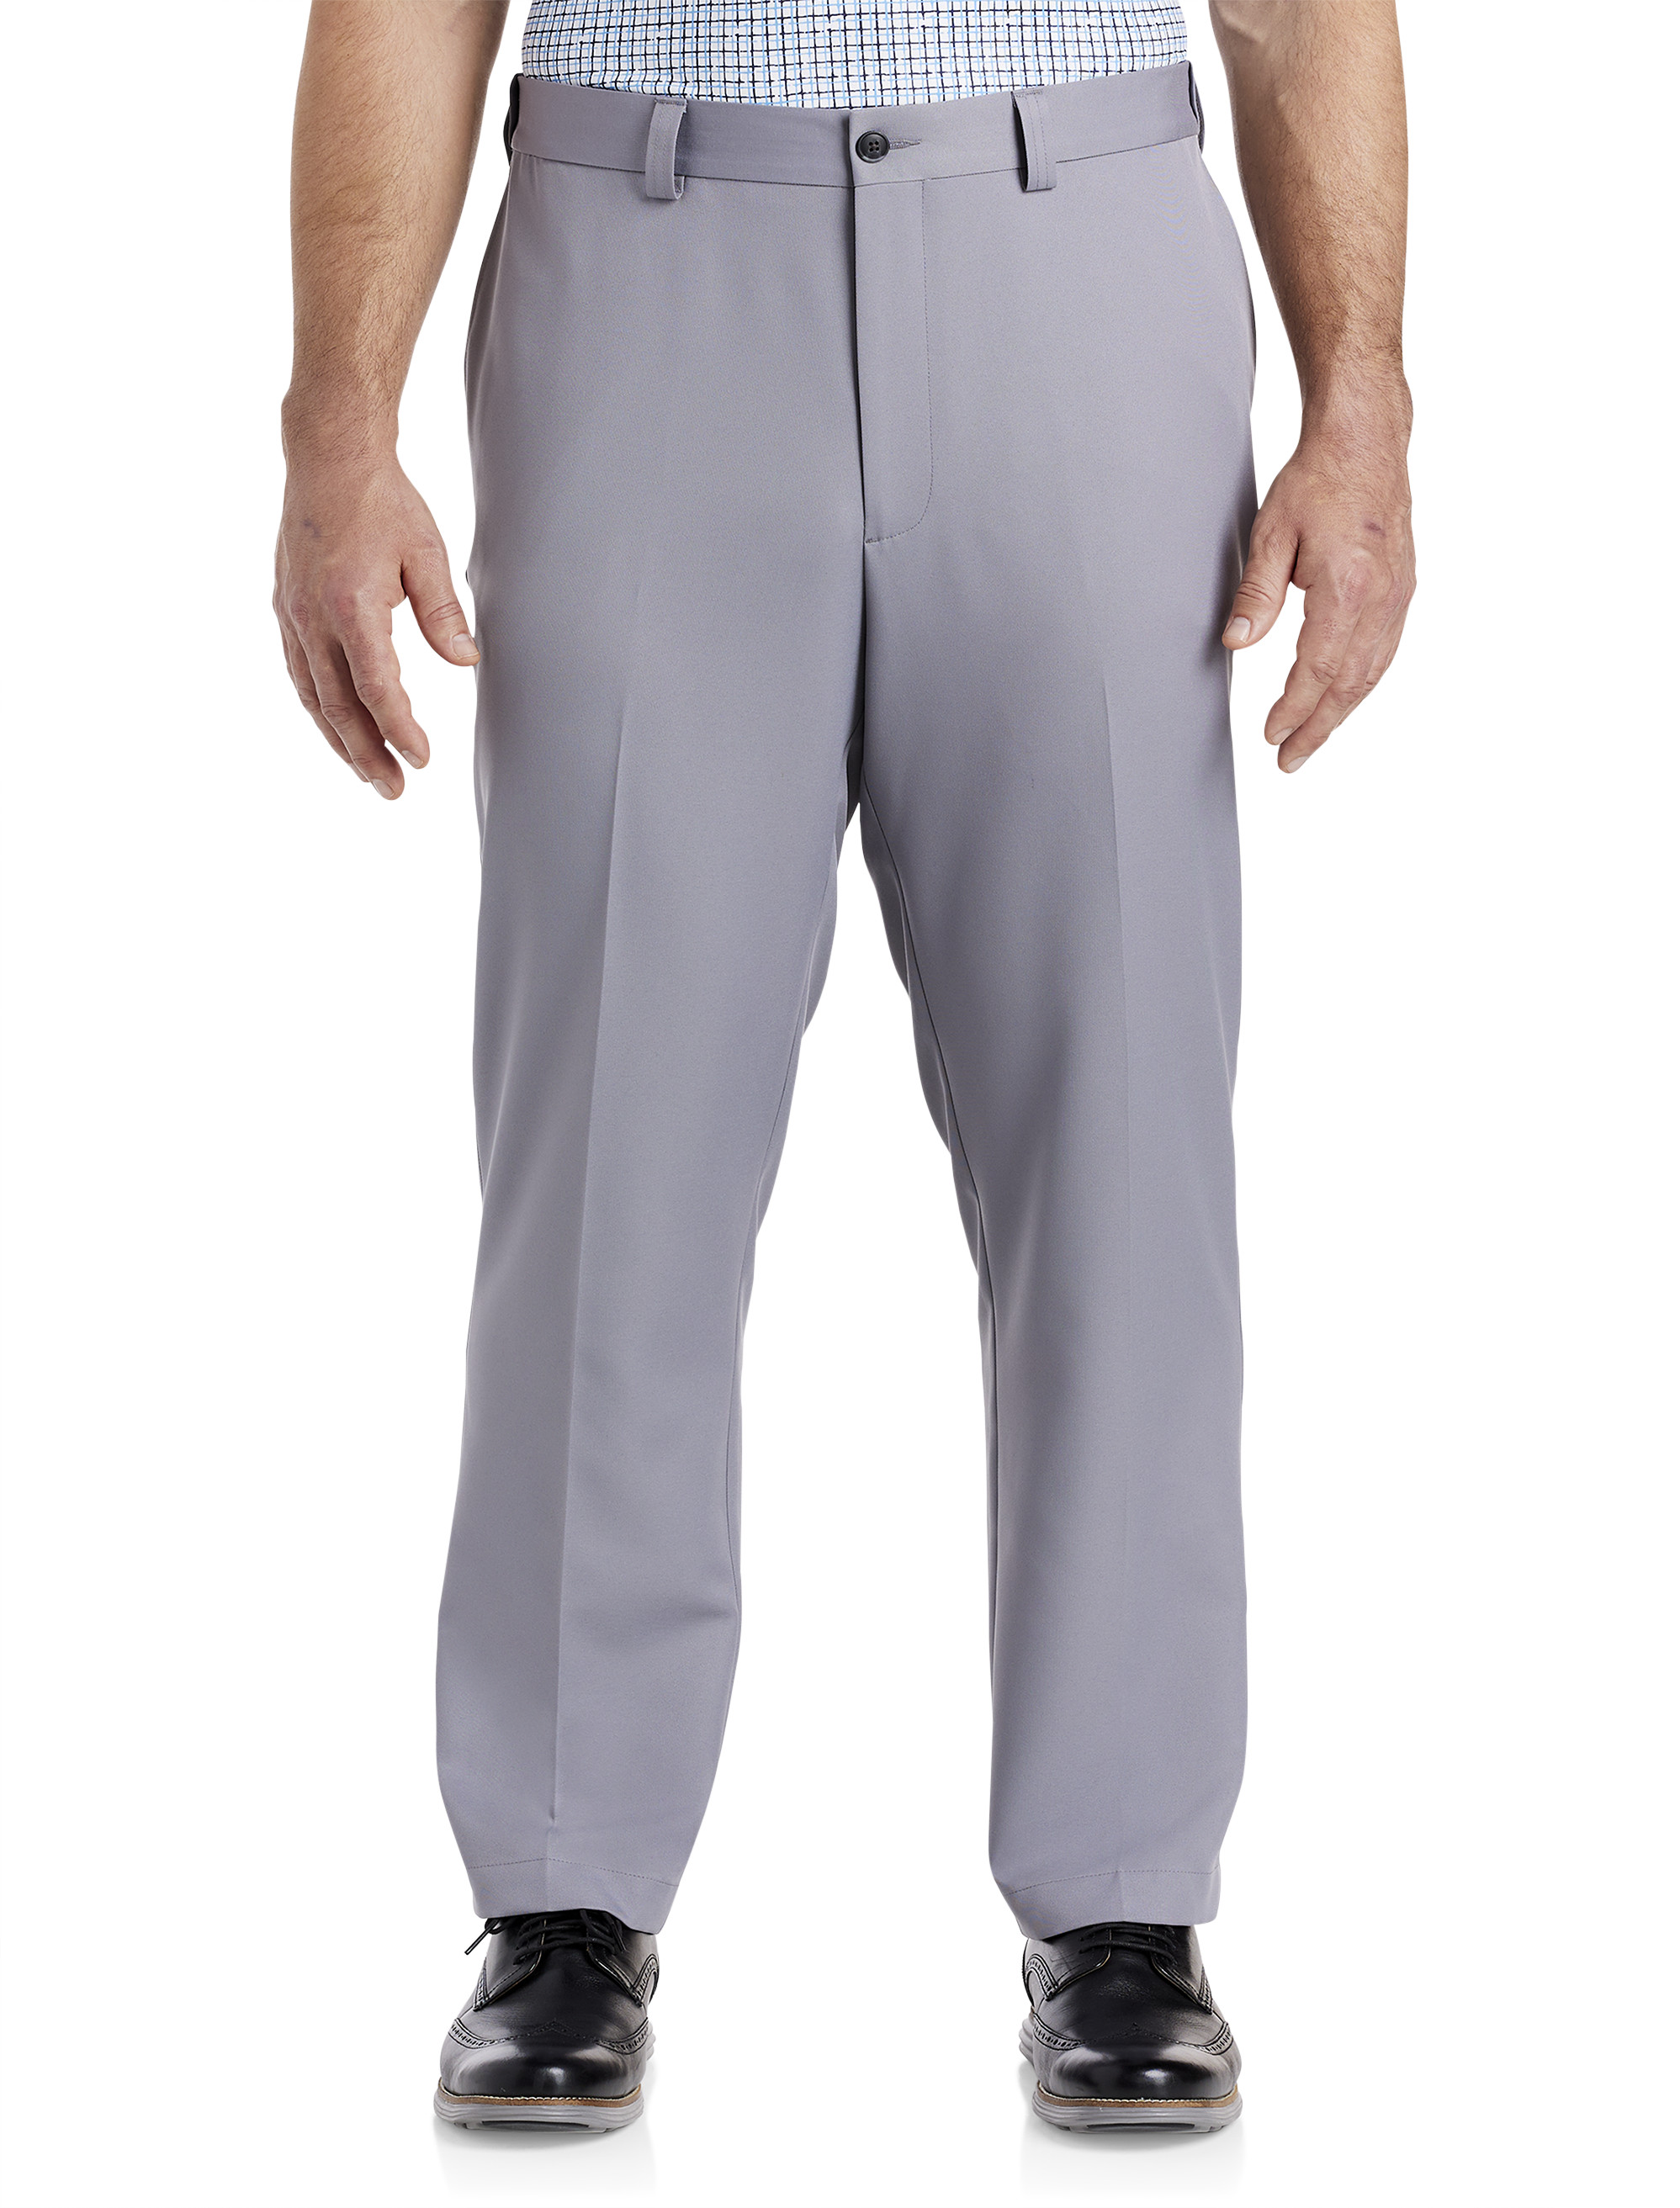 Big and Tall Men's Suit Pants Regular Fit. Size 3XL 7XL Waist From 42 50  Inches 